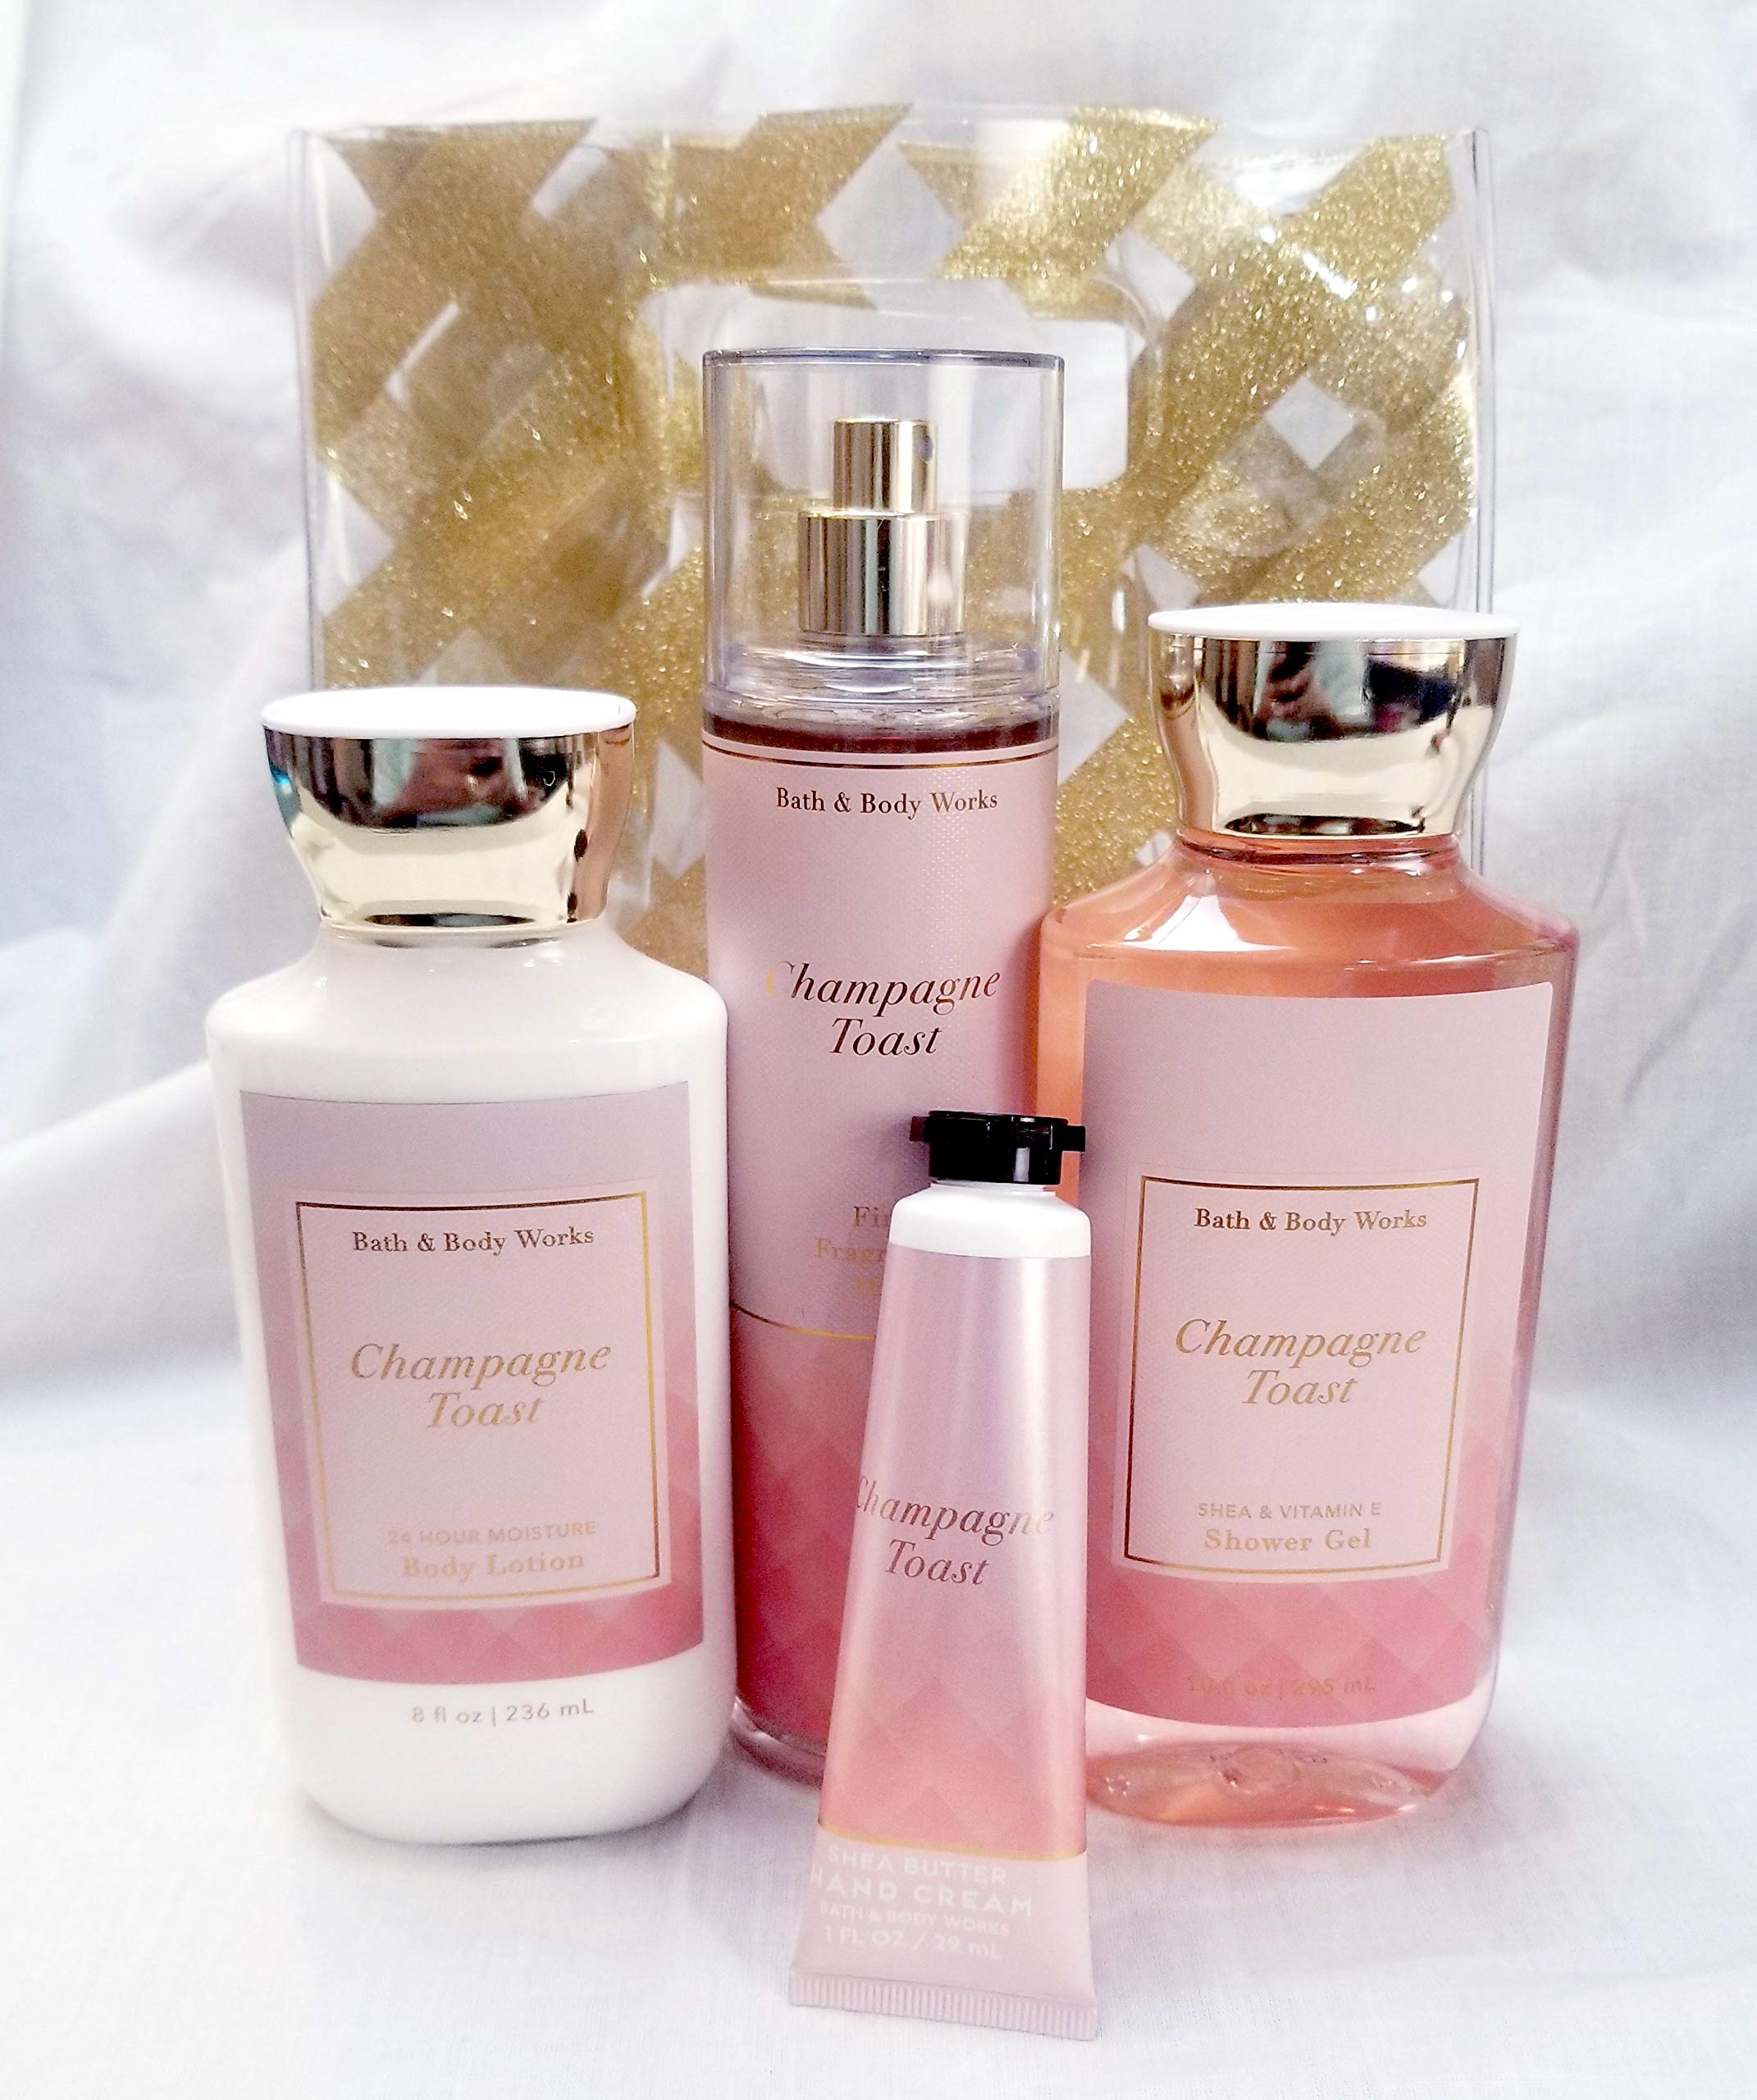 Bath and Body Works - Champagne Toast Body Care - Full Size 4 Piece Gift set + Random Gift Bag (Includes Fragrance Mist, Shower Gel, Lotion, and Ha...